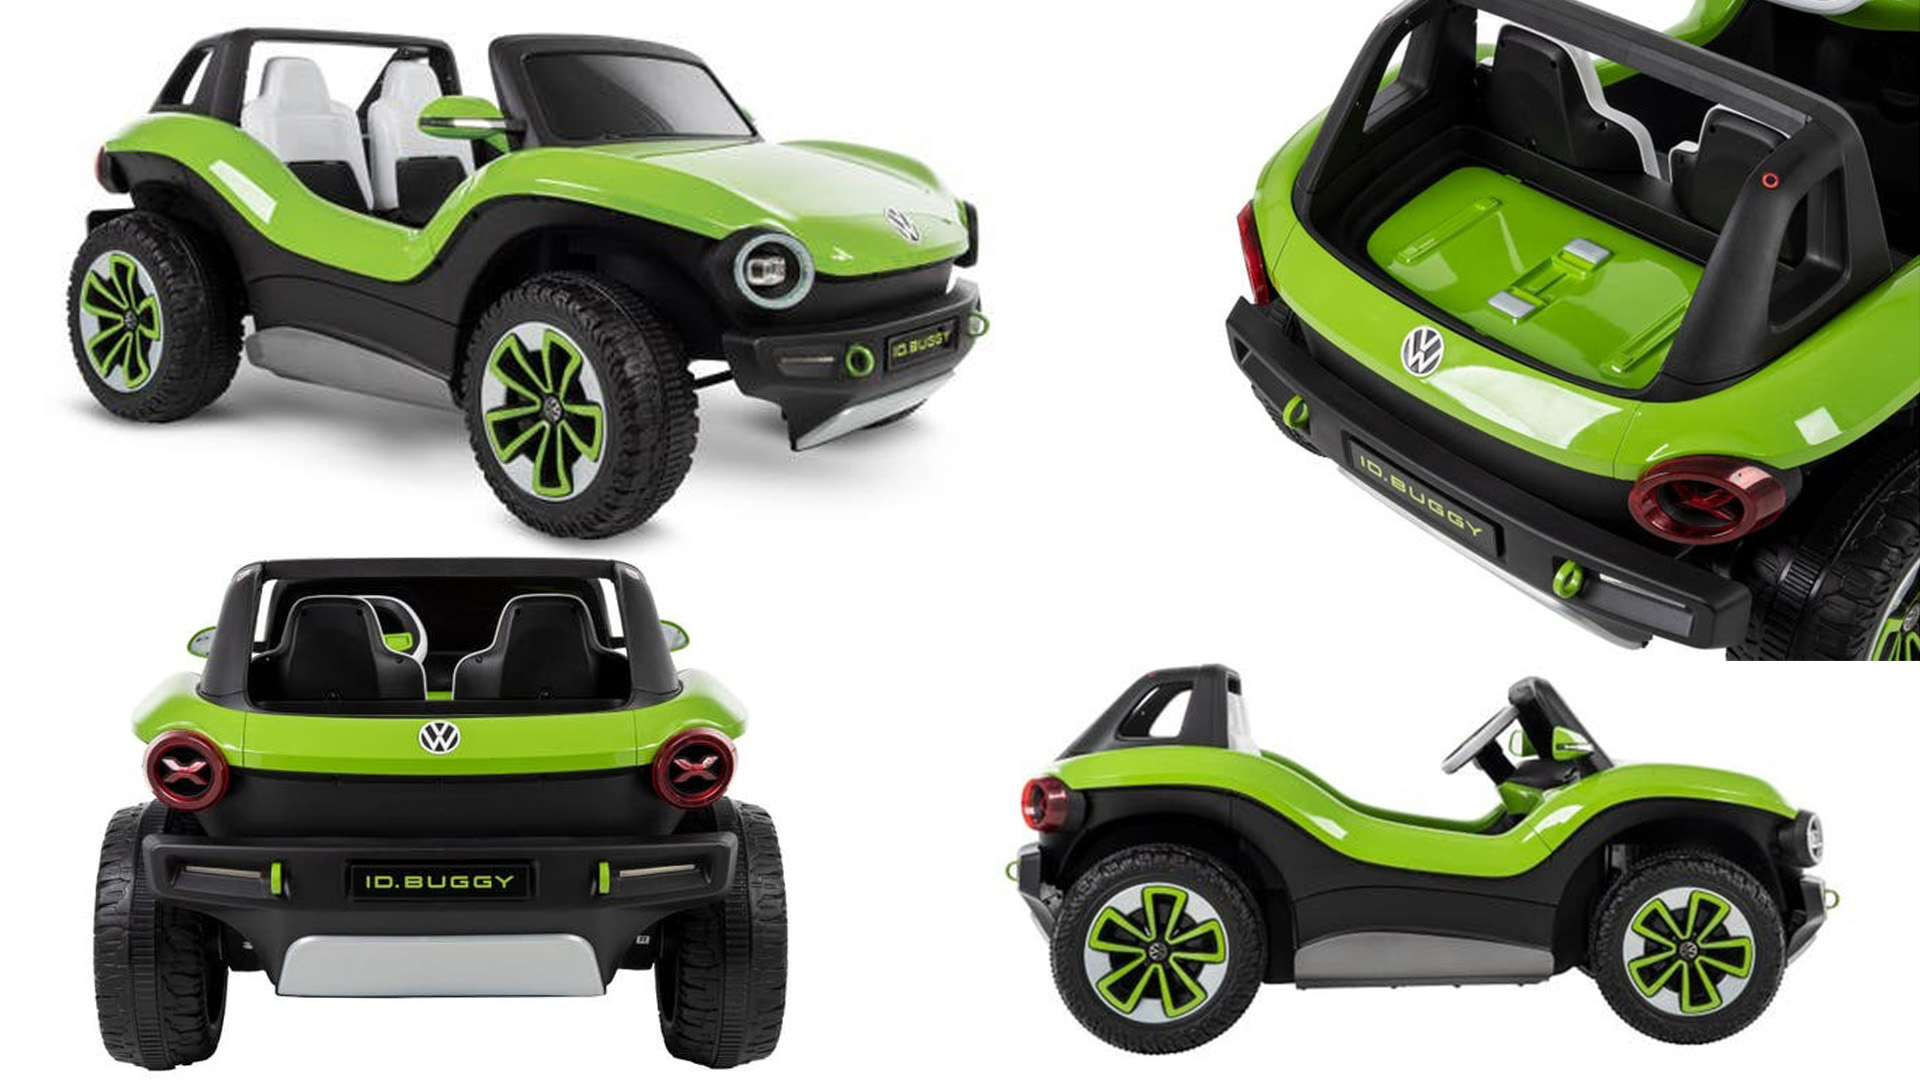 Volkswagen is not producing its electric buggy, but there are still options for your child to own one.